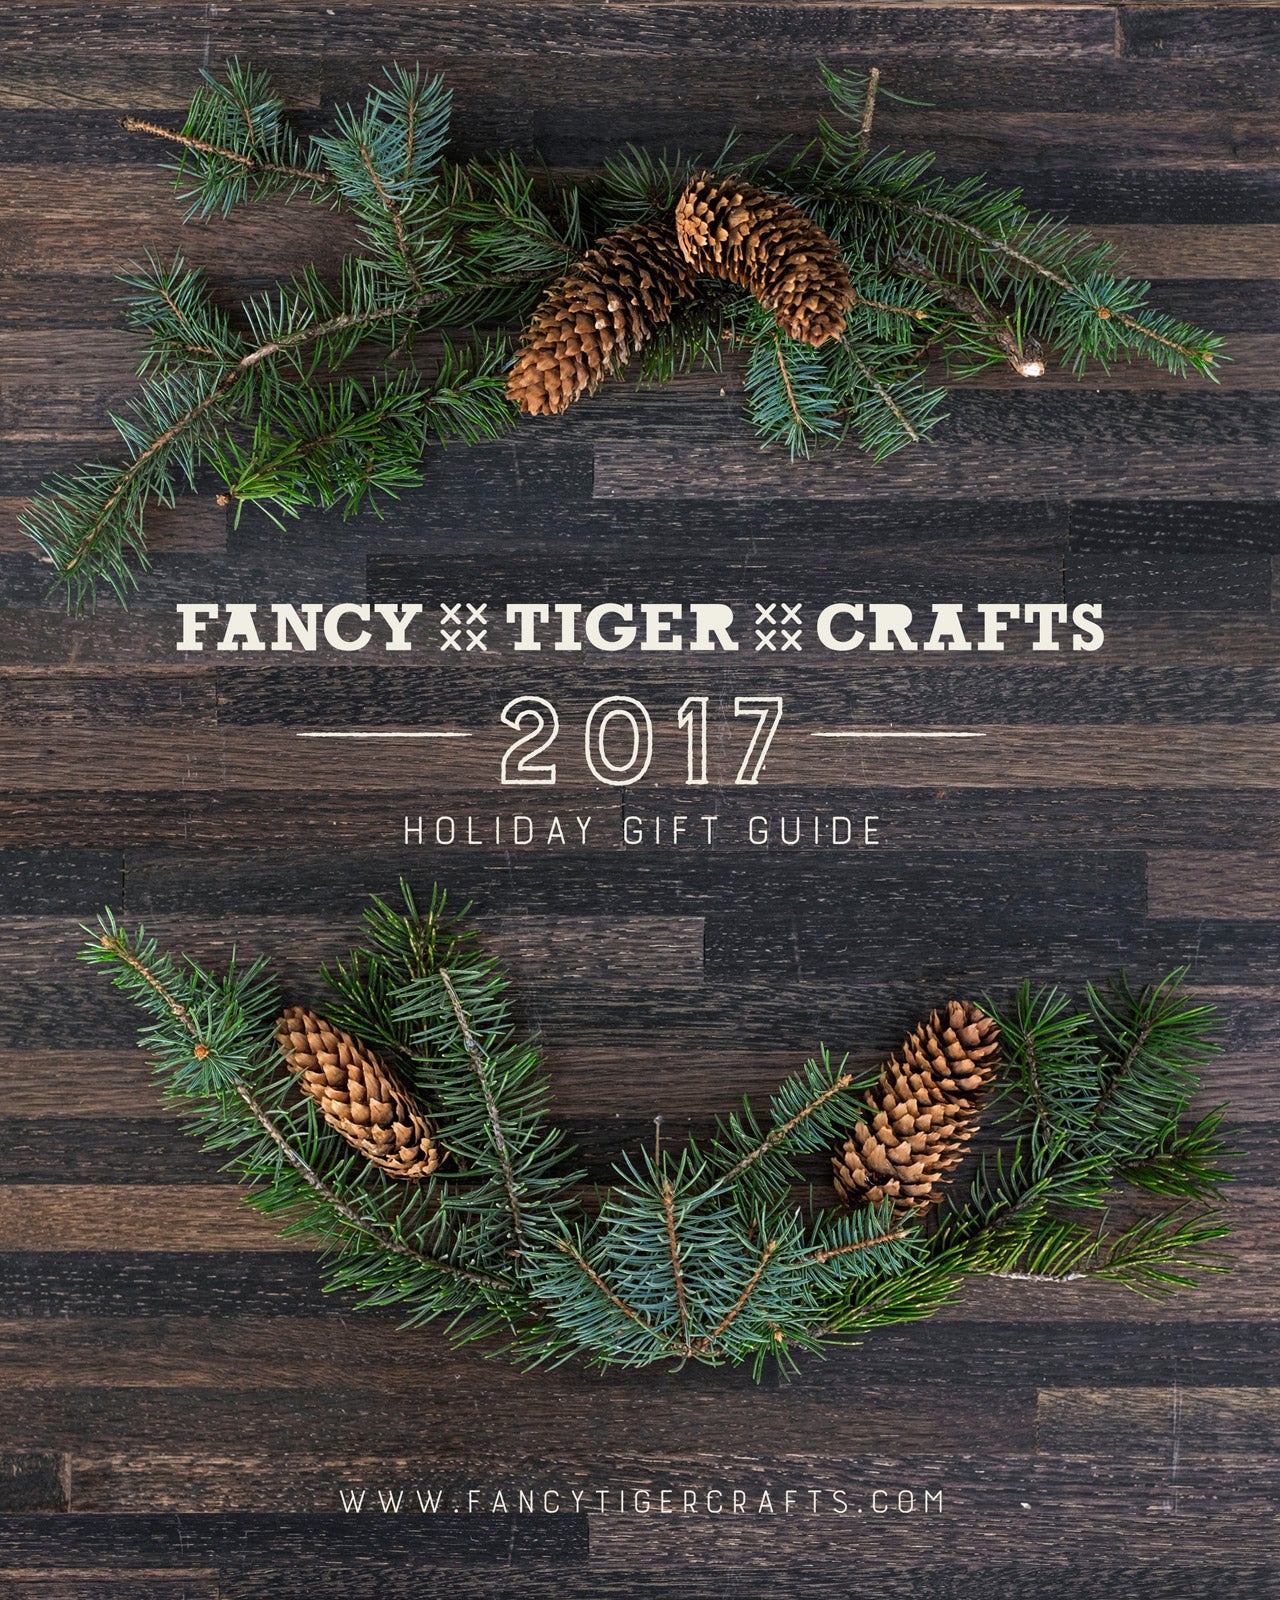 Fancy Tiger Crafts Holiday Gift Guide 2017 Cover with Pine Clippings